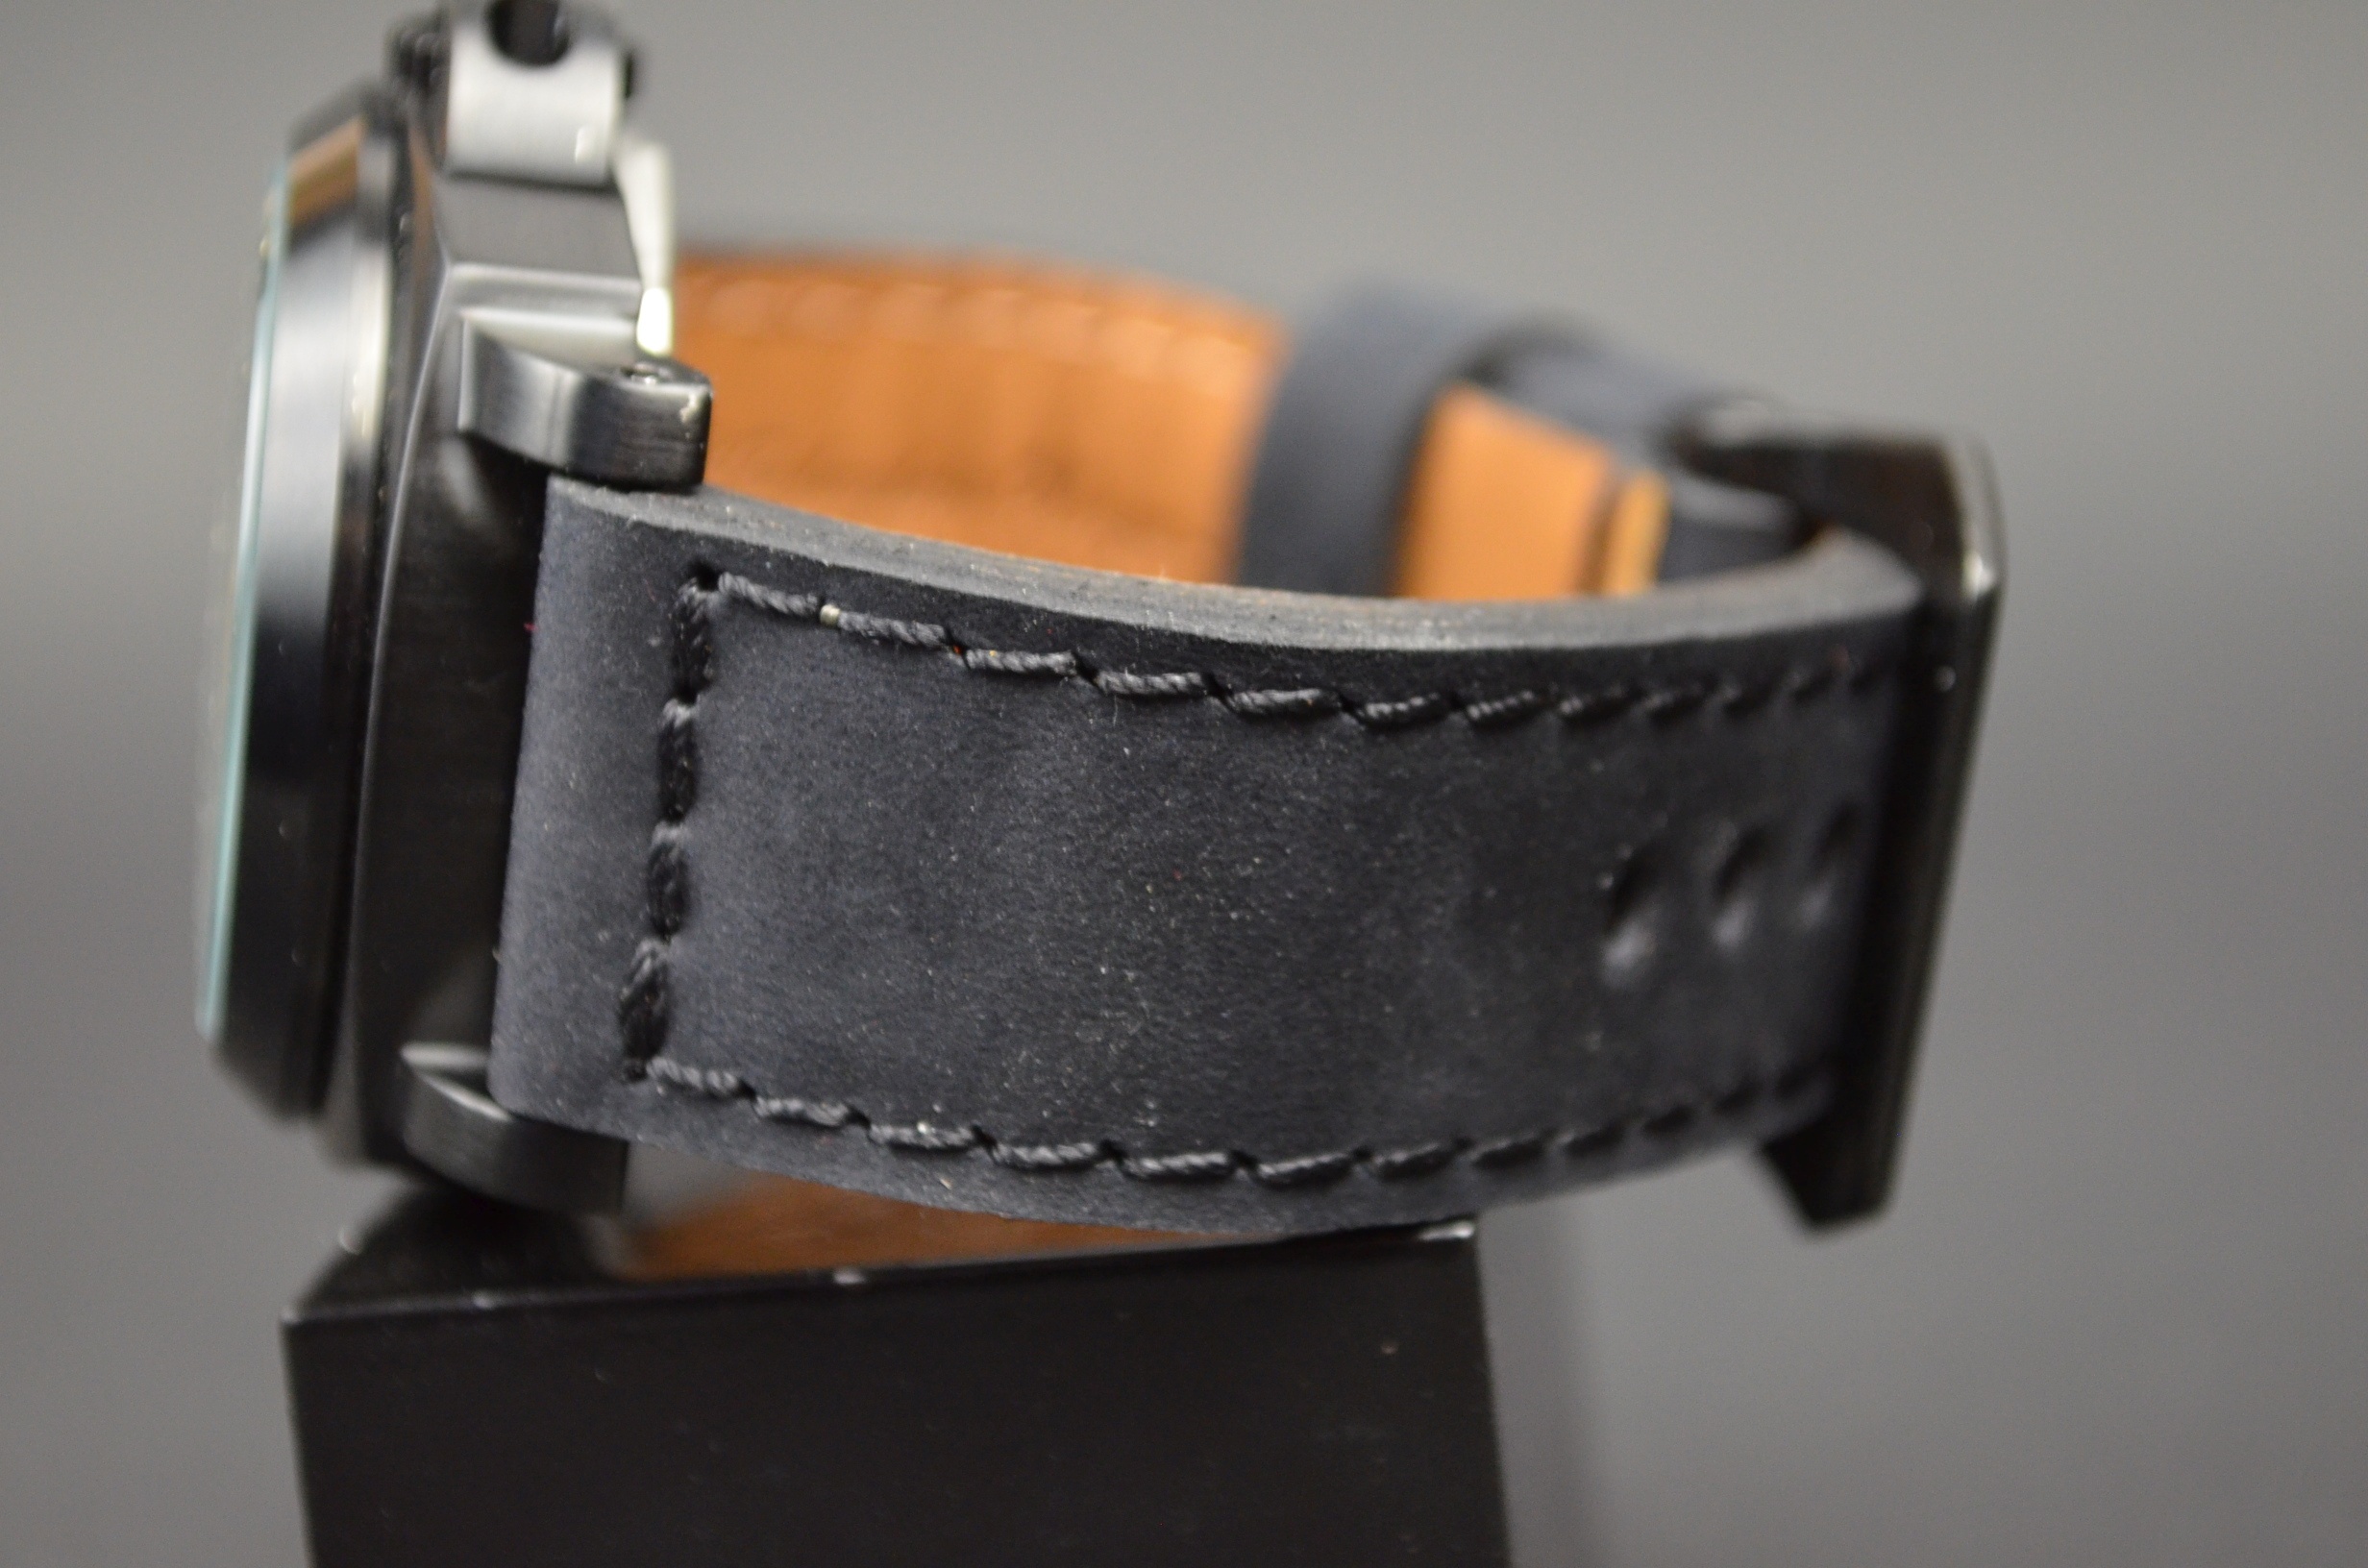 BLACK I is one of our hand crafted watch straps. Available in black color, 4 - 4.5 mm thick.